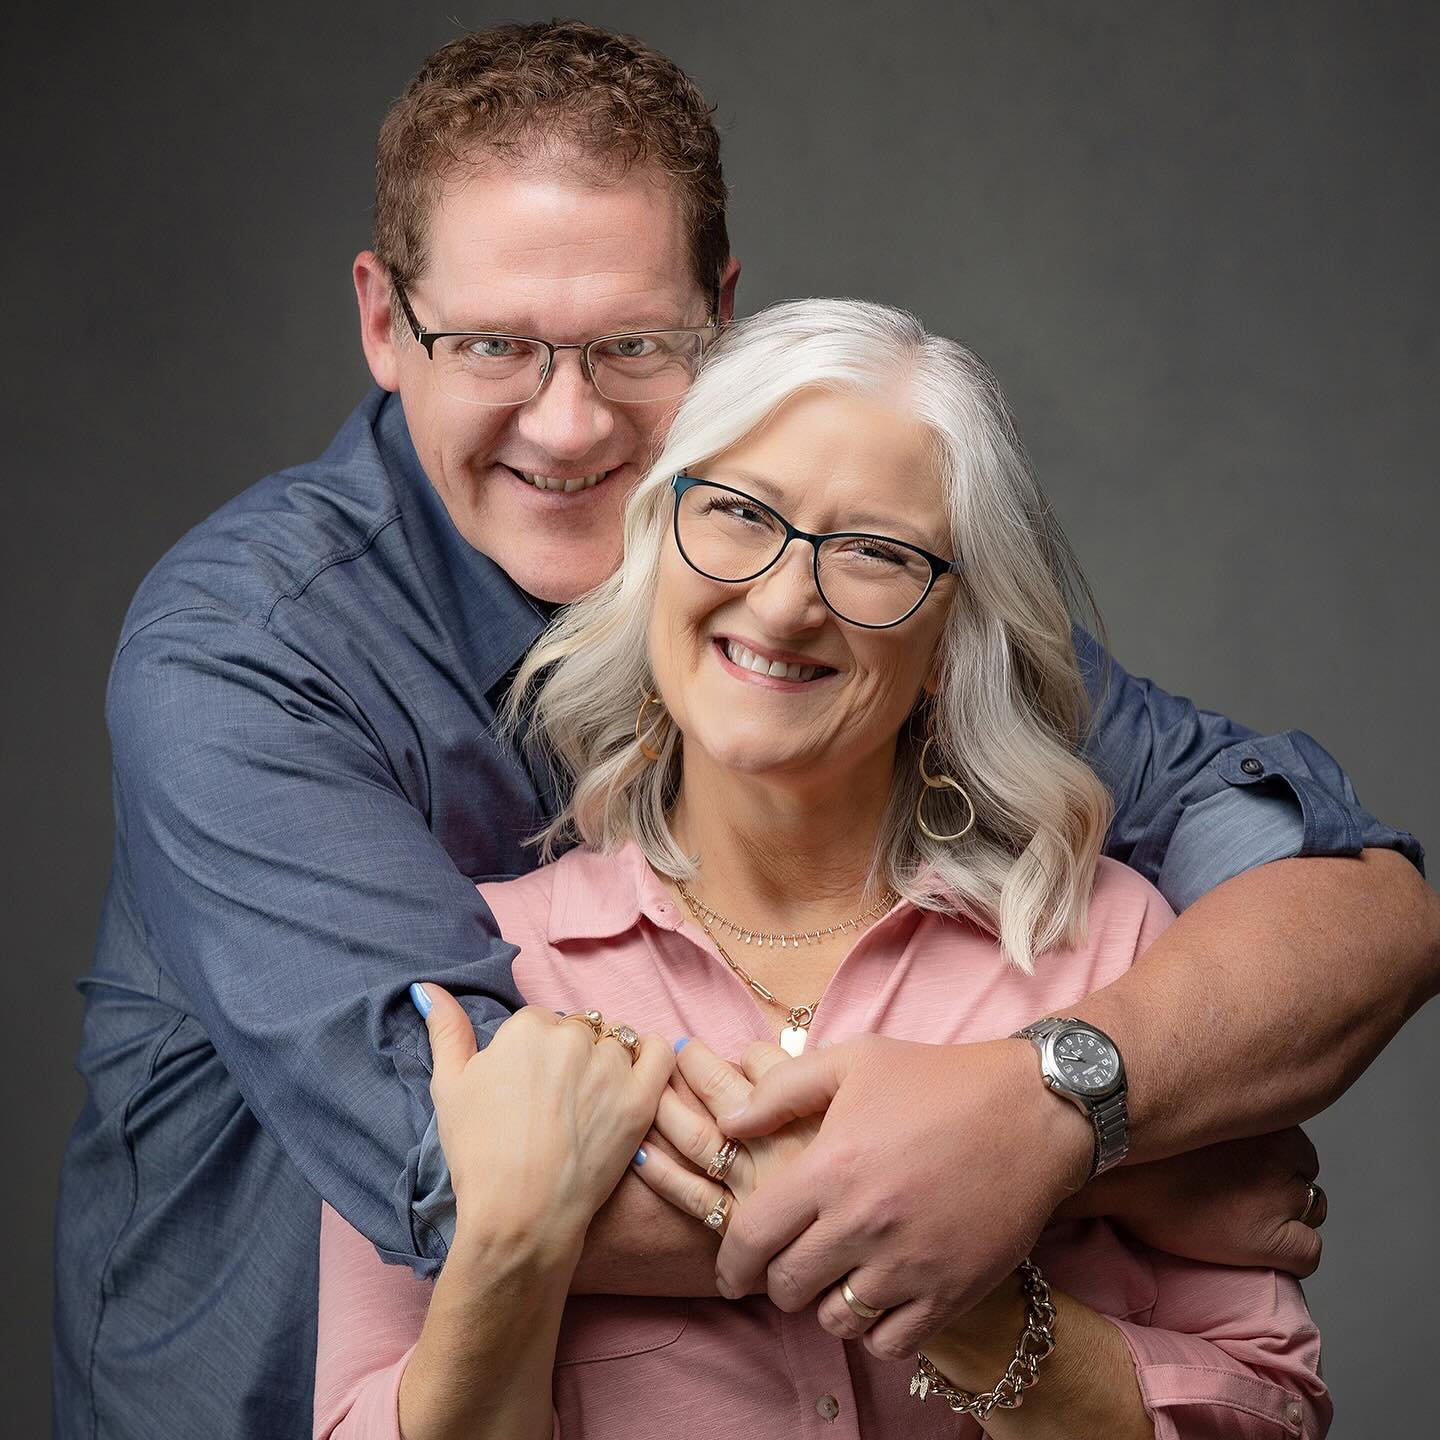 I met this sweet couple through @msmoments_iowa (if you have MS or love someone who does, go check them out!). Lisa is sweet as can be while Steve made with the jokes the entire session ☺️